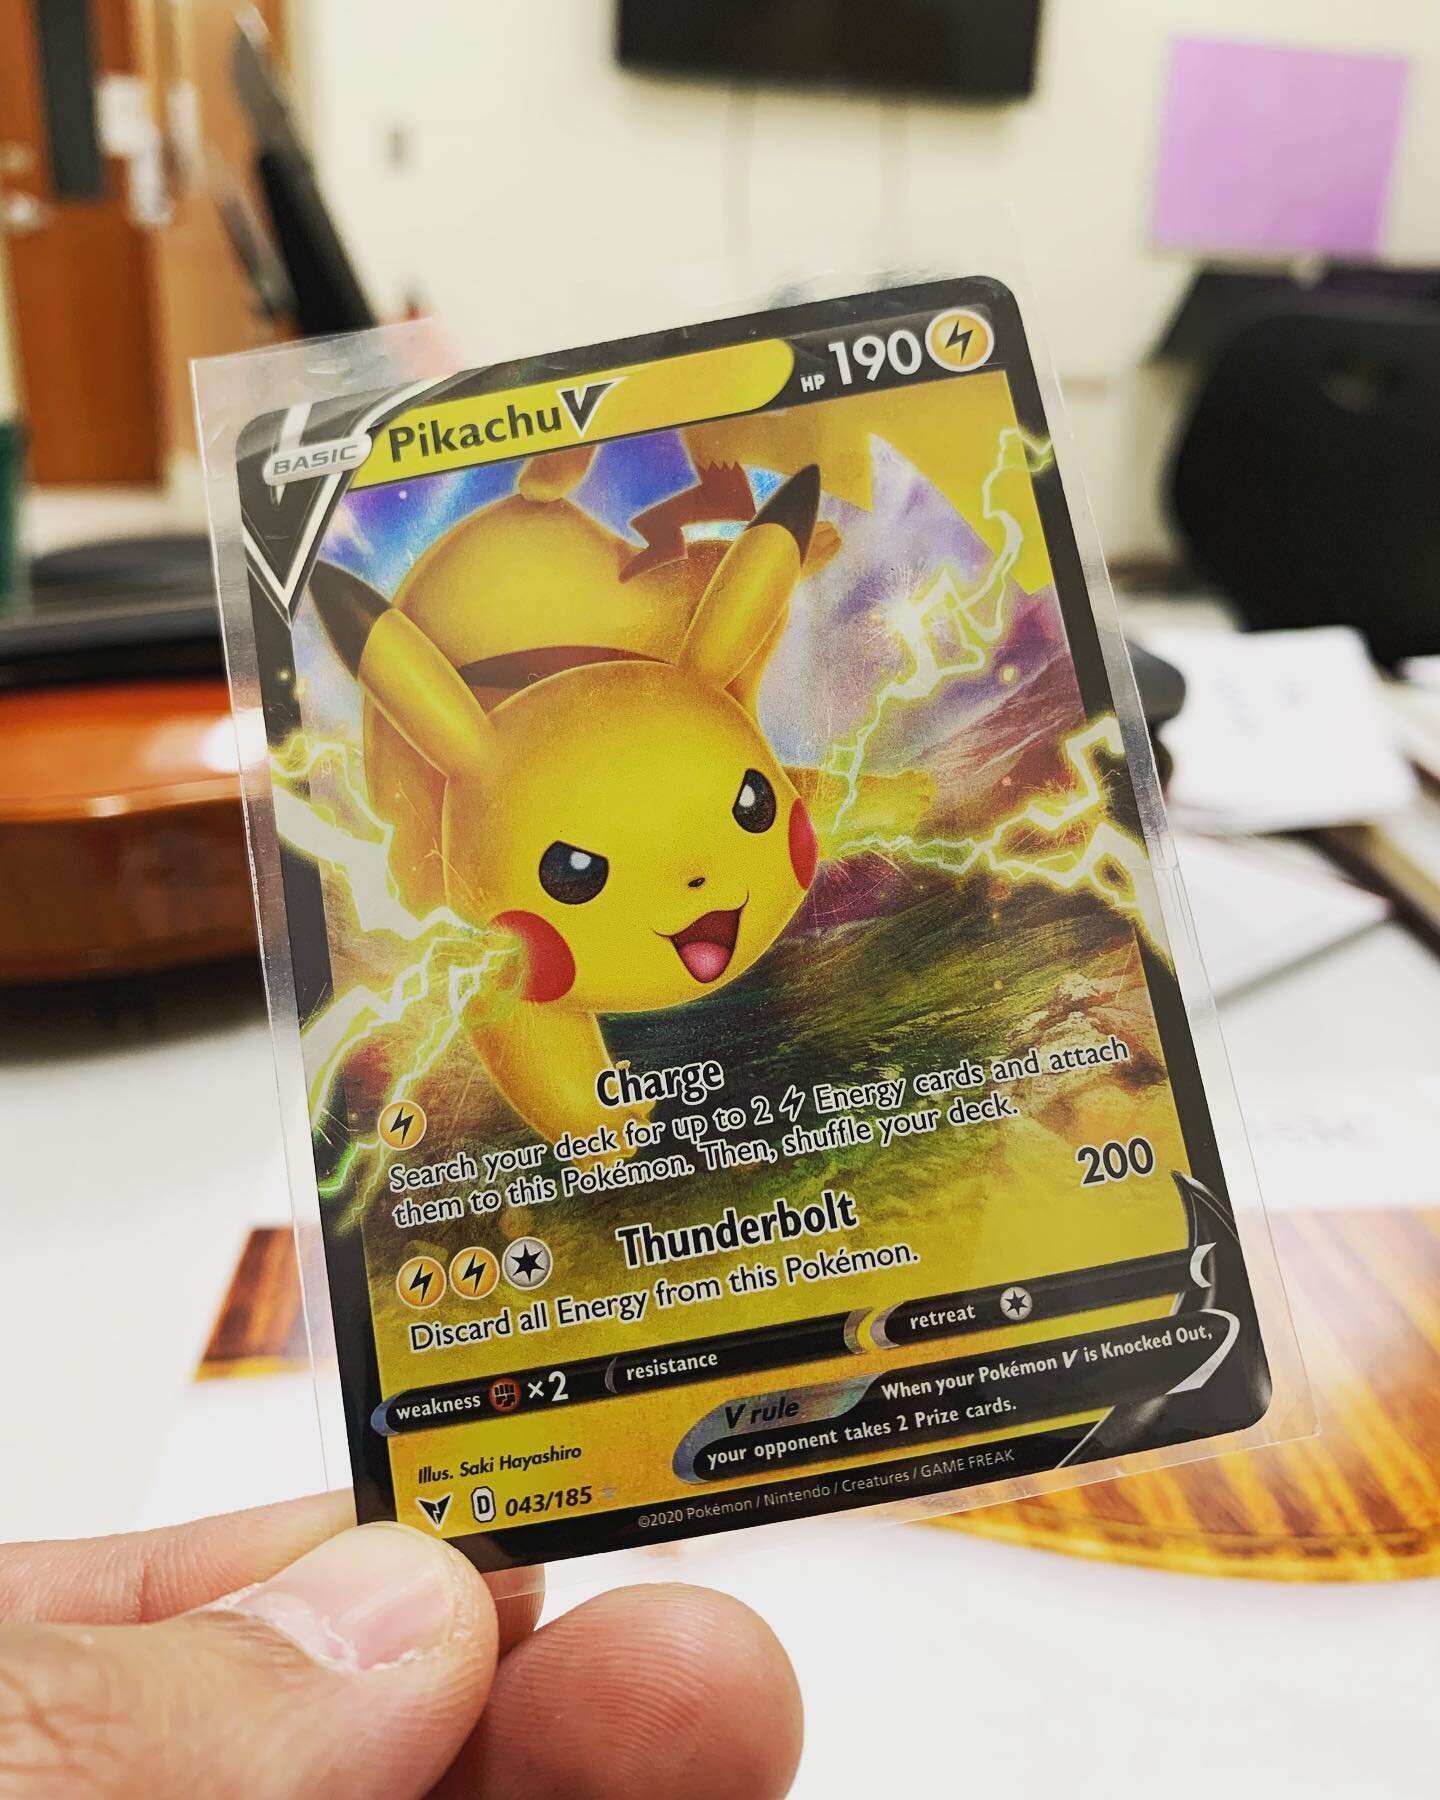 First Lesson of the Day
Kid: Mr. P, do you like Pokemon?
Me: *staring at my Pikachu piggy bank* no
Kid: Do you like Pikachu?
Me: *stares even more aggressively at Pikachu* no
Kid: Do you like Pokemon cards?
Me: *coyly* yes
Kid: Here&rsquo;s a Pikachu